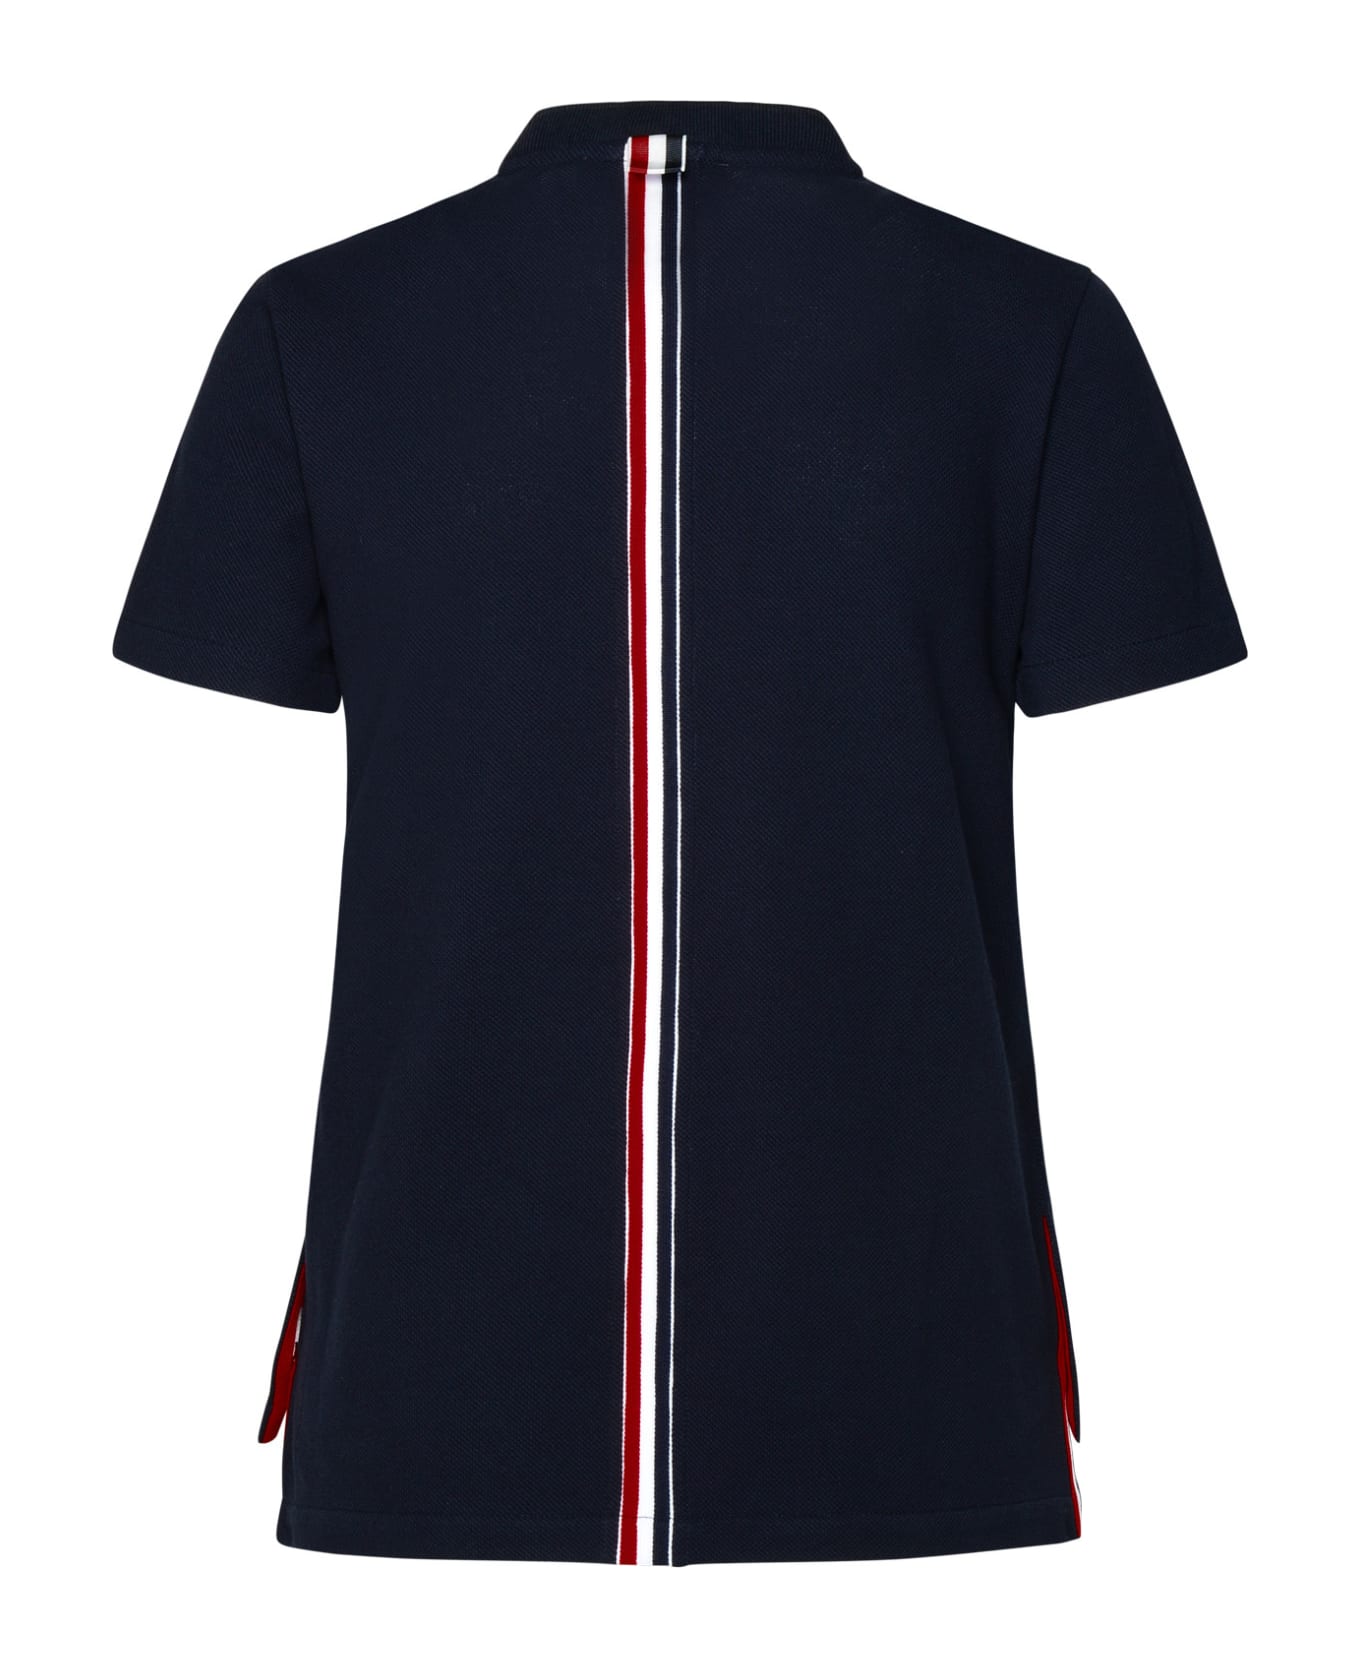 Thom Browne 'relaxed' Navy Textured Cotton T-shirt - Navy